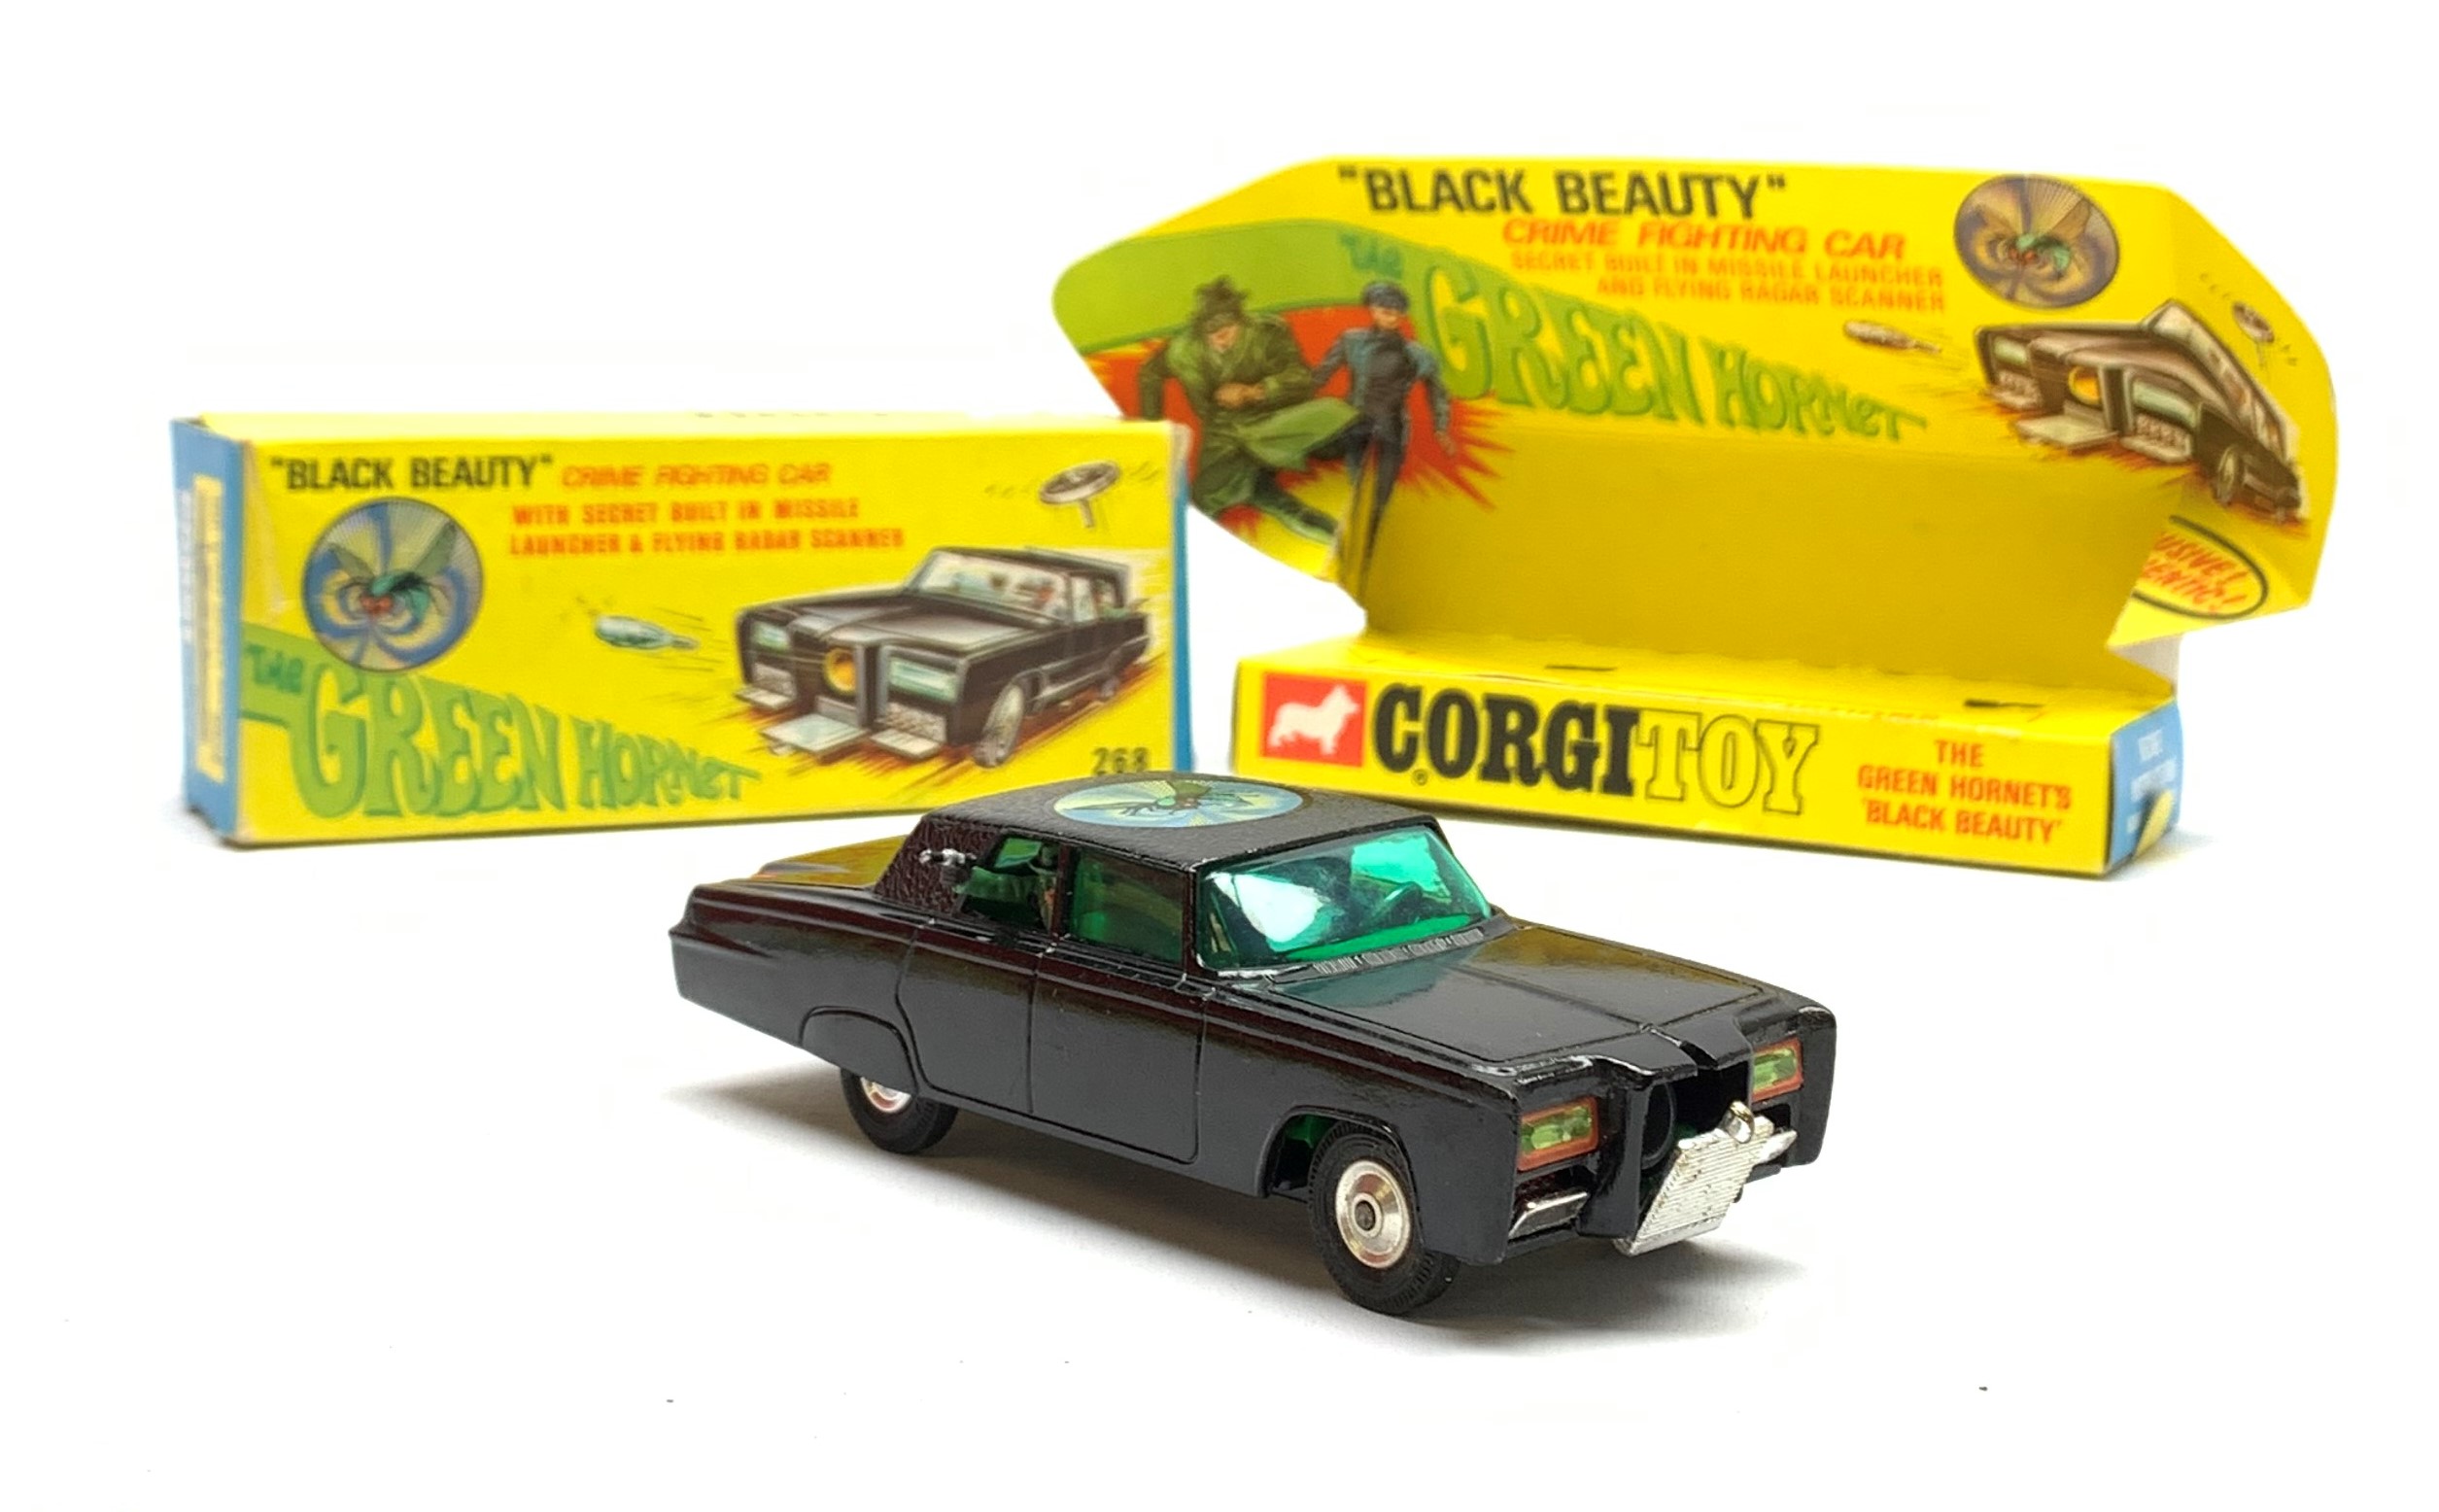 Corgi - Green Hornet Black Beauty Crime Fighting Car No.268, boxed with inner pictorial stand, three